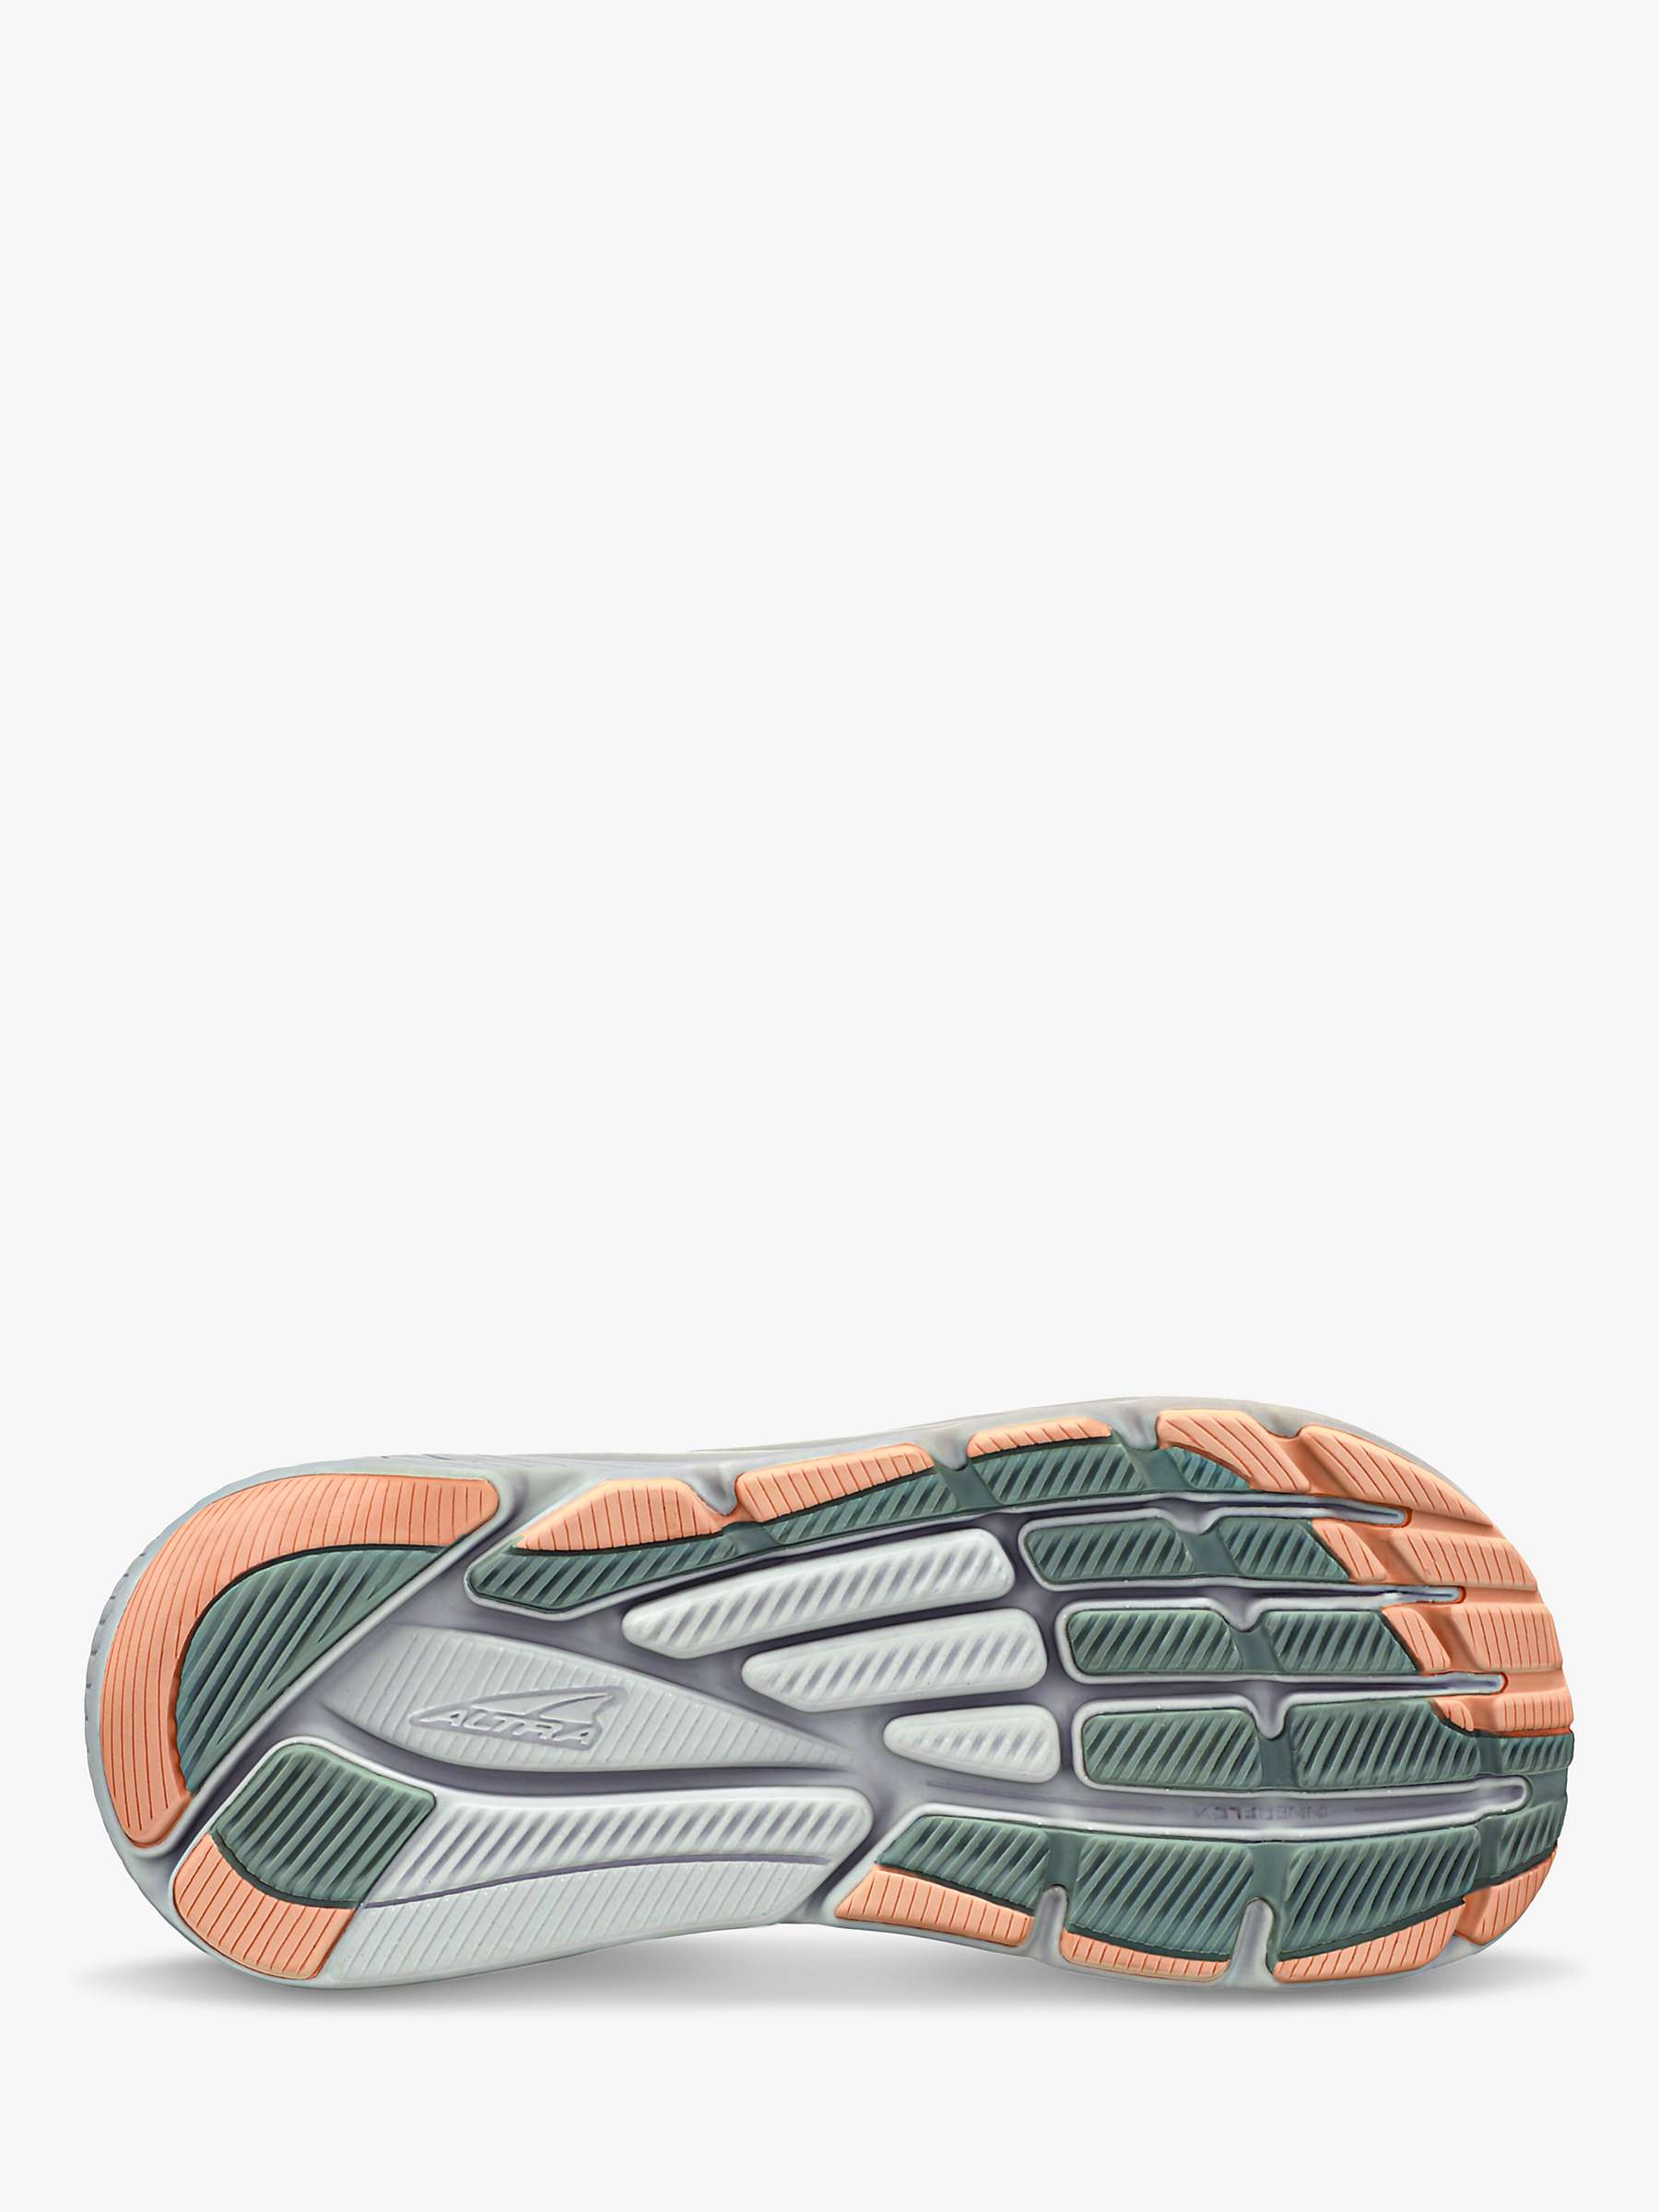 Buy Altra VIA Olympus 2 Women's Running Shoes Online at johnlewis.com